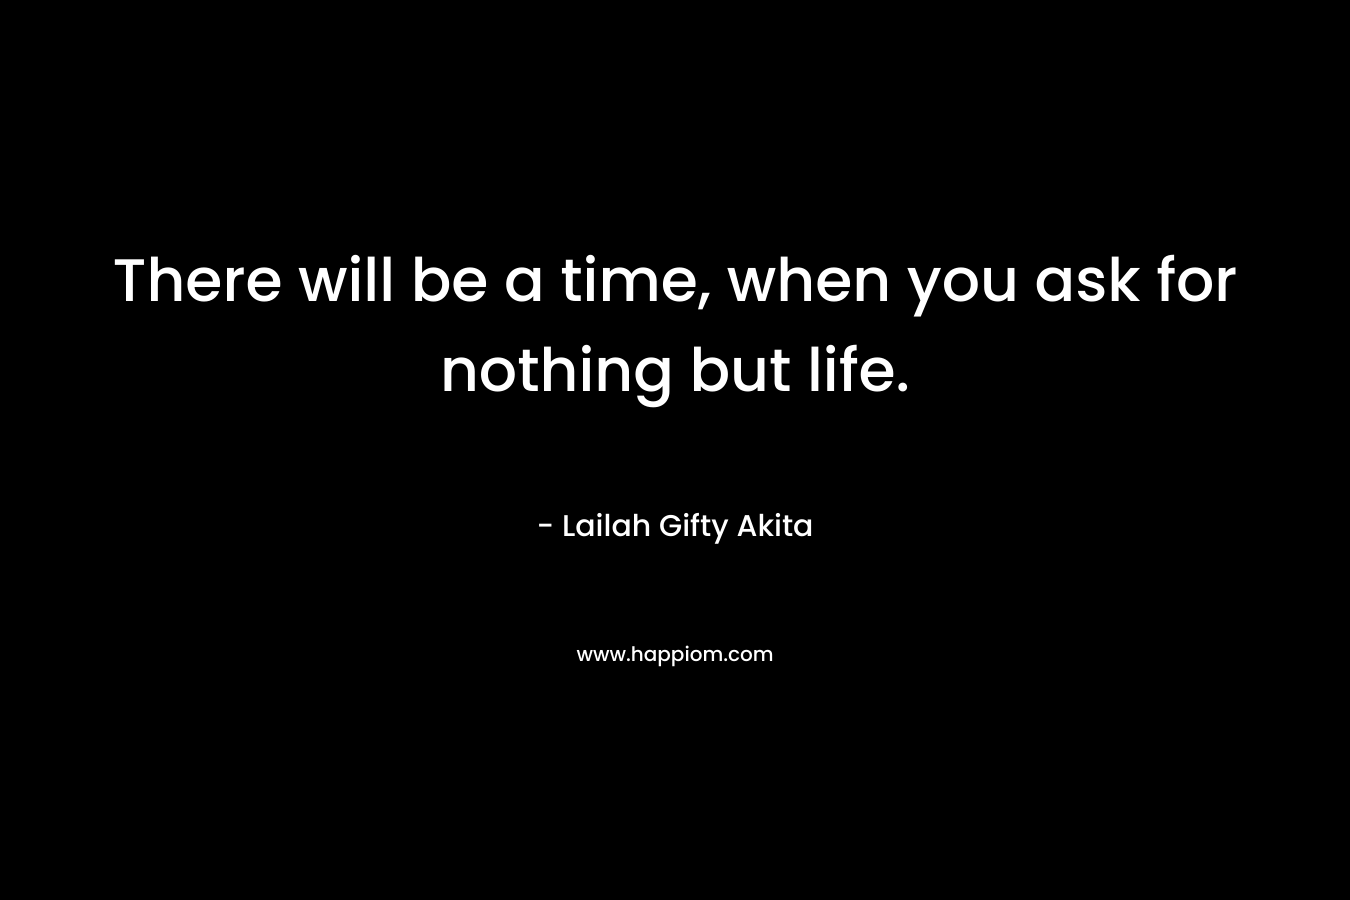 There will be a time, when you ask for nothing but life.